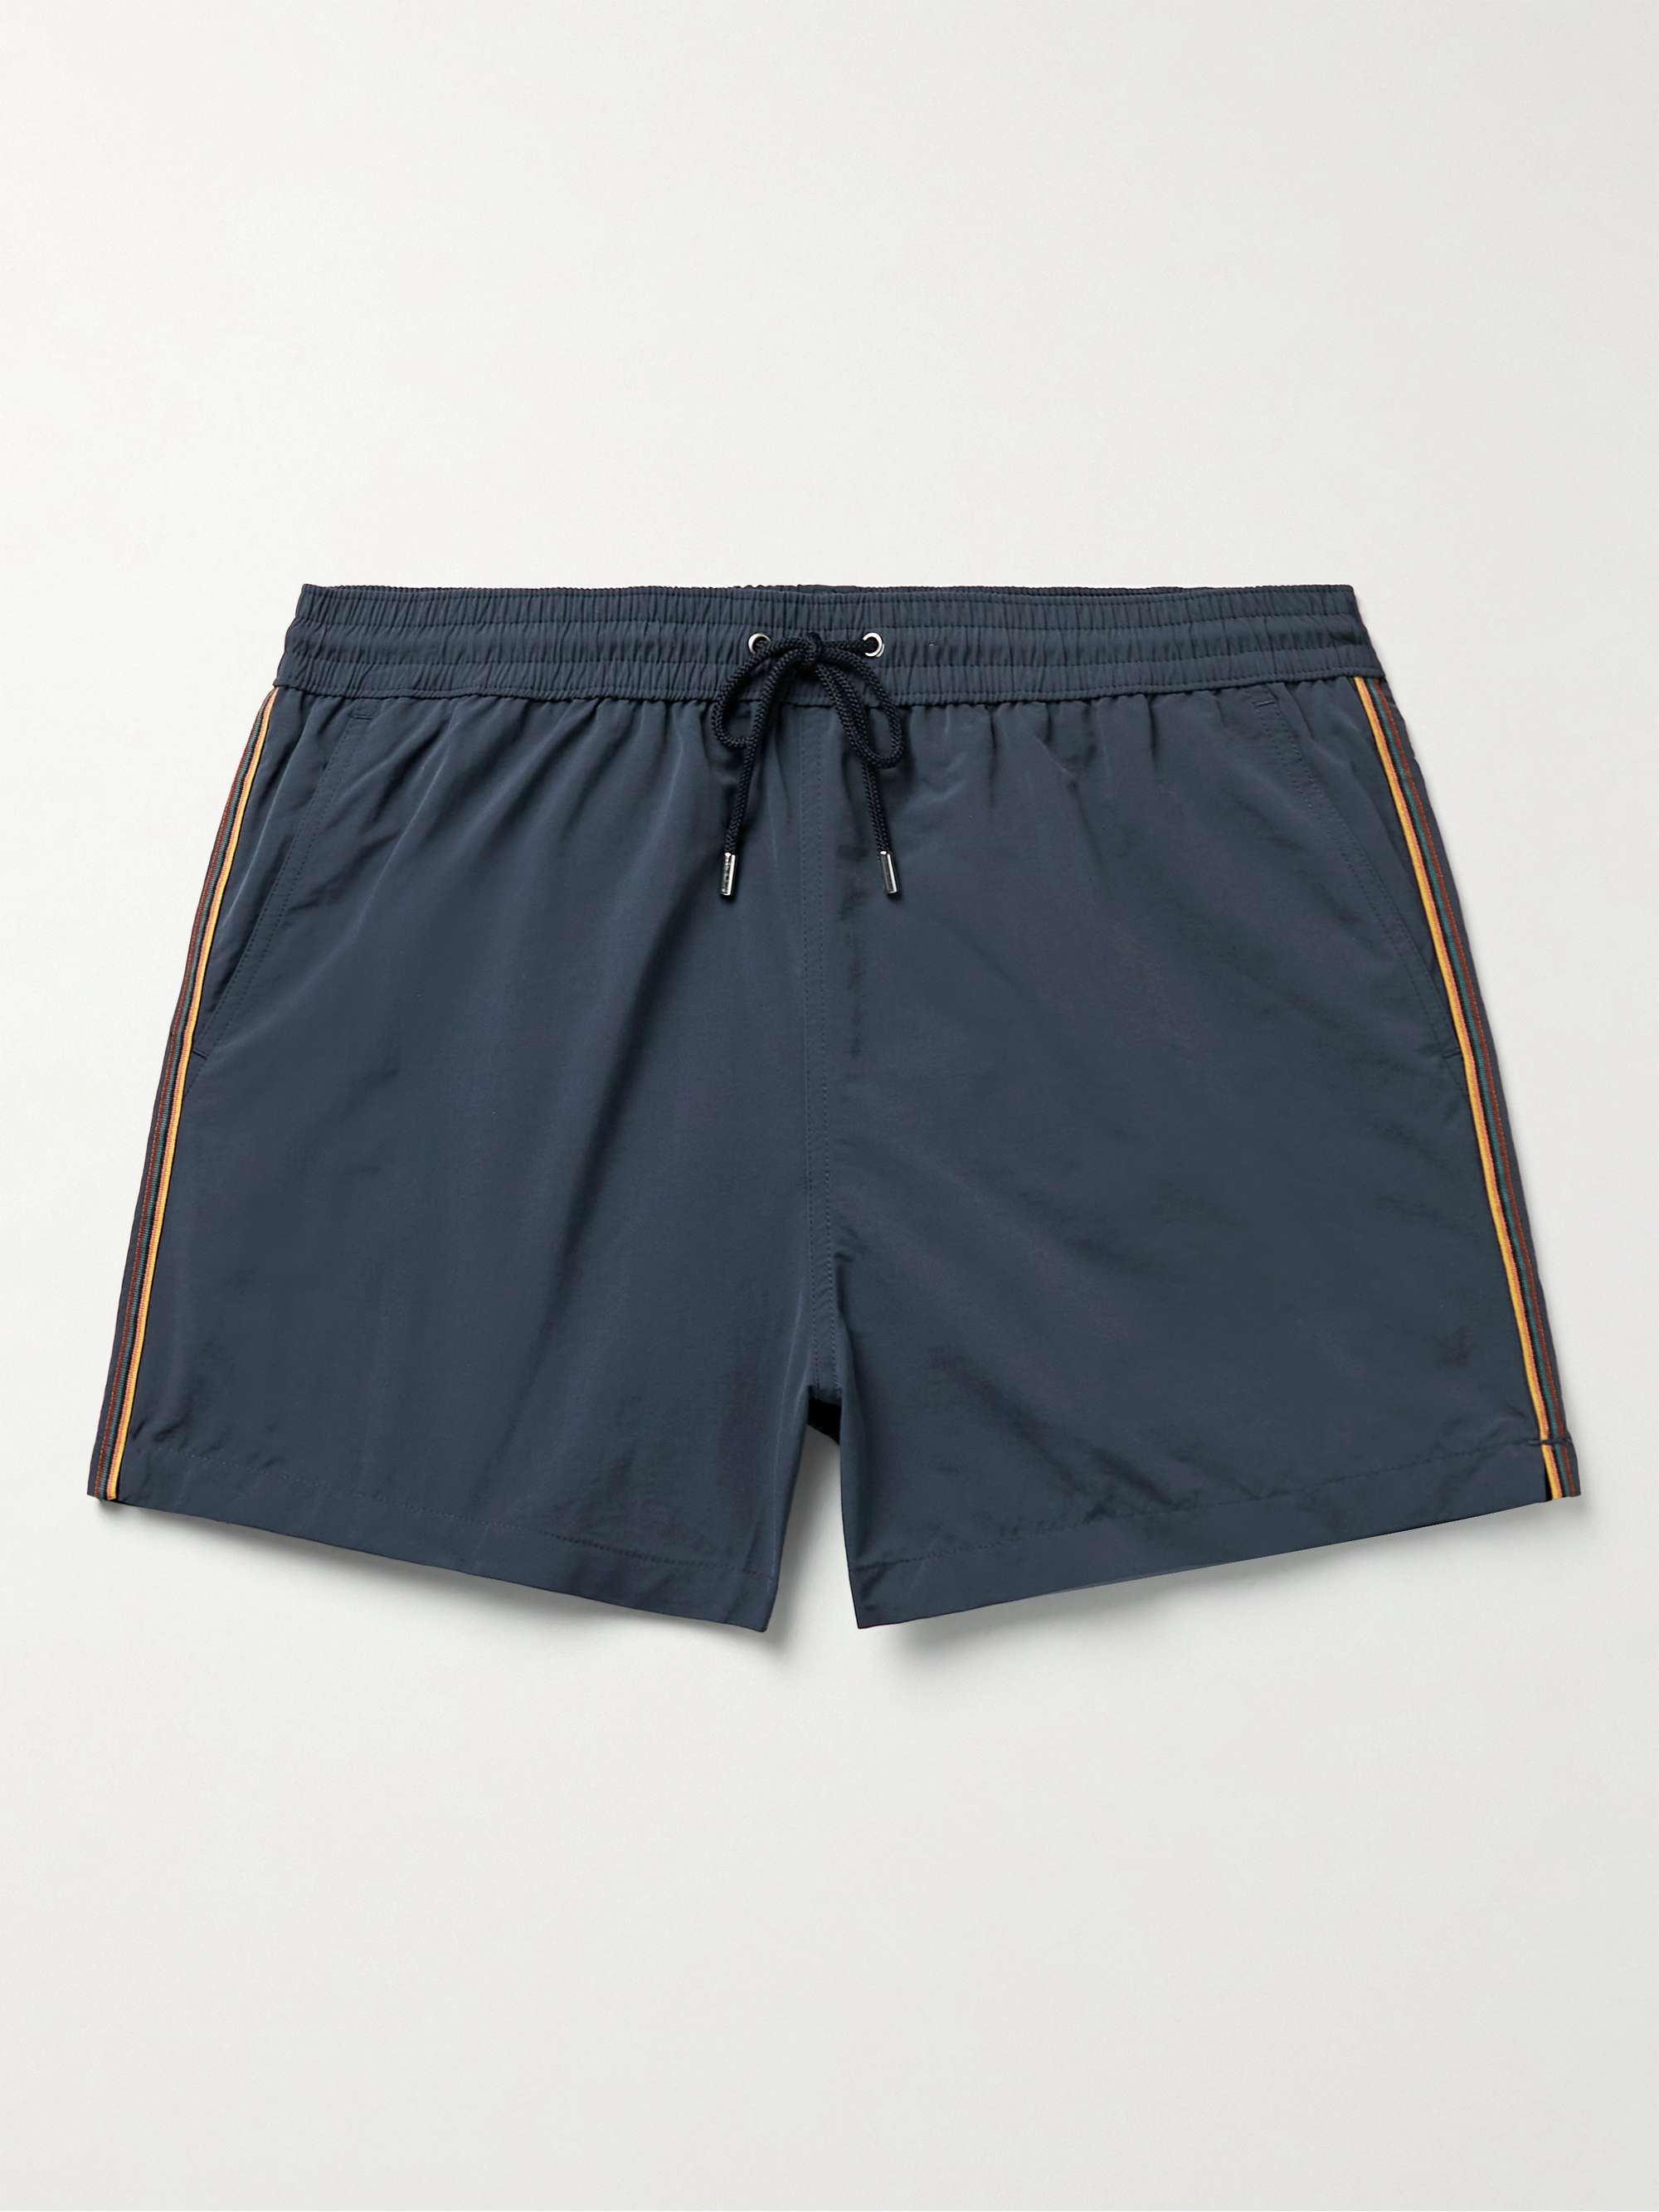 PAUL SMITH Slim-Fit Short-Length Striped Recycled Swim Shorts